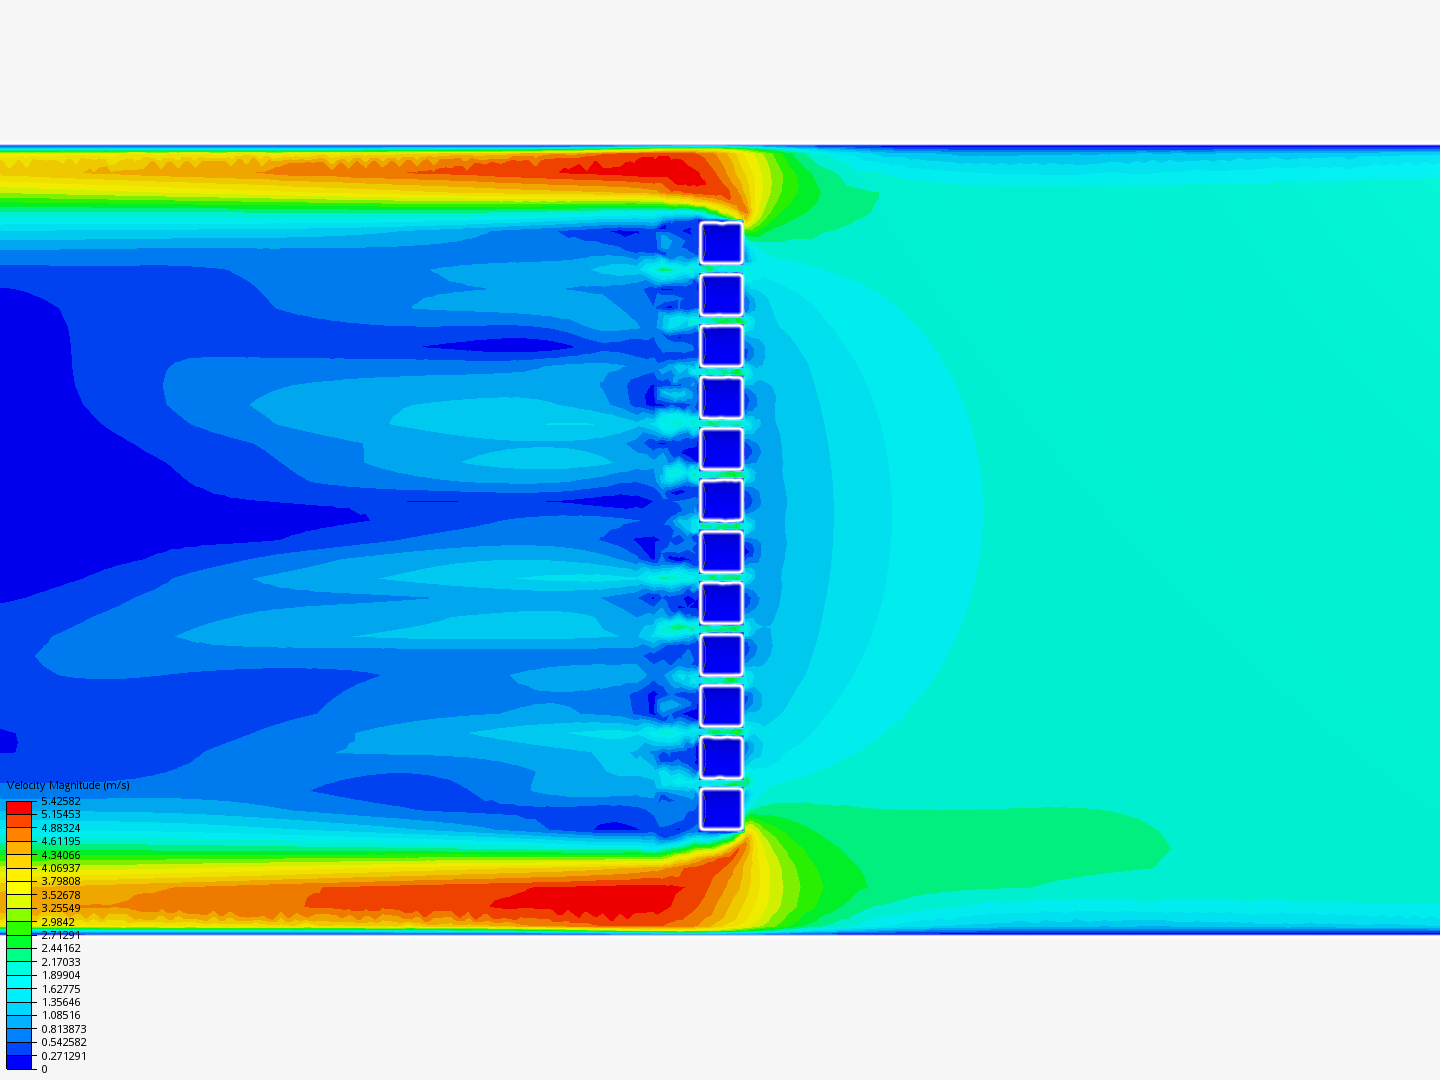 Smaller Scaled Perforation in Duct Simulation image